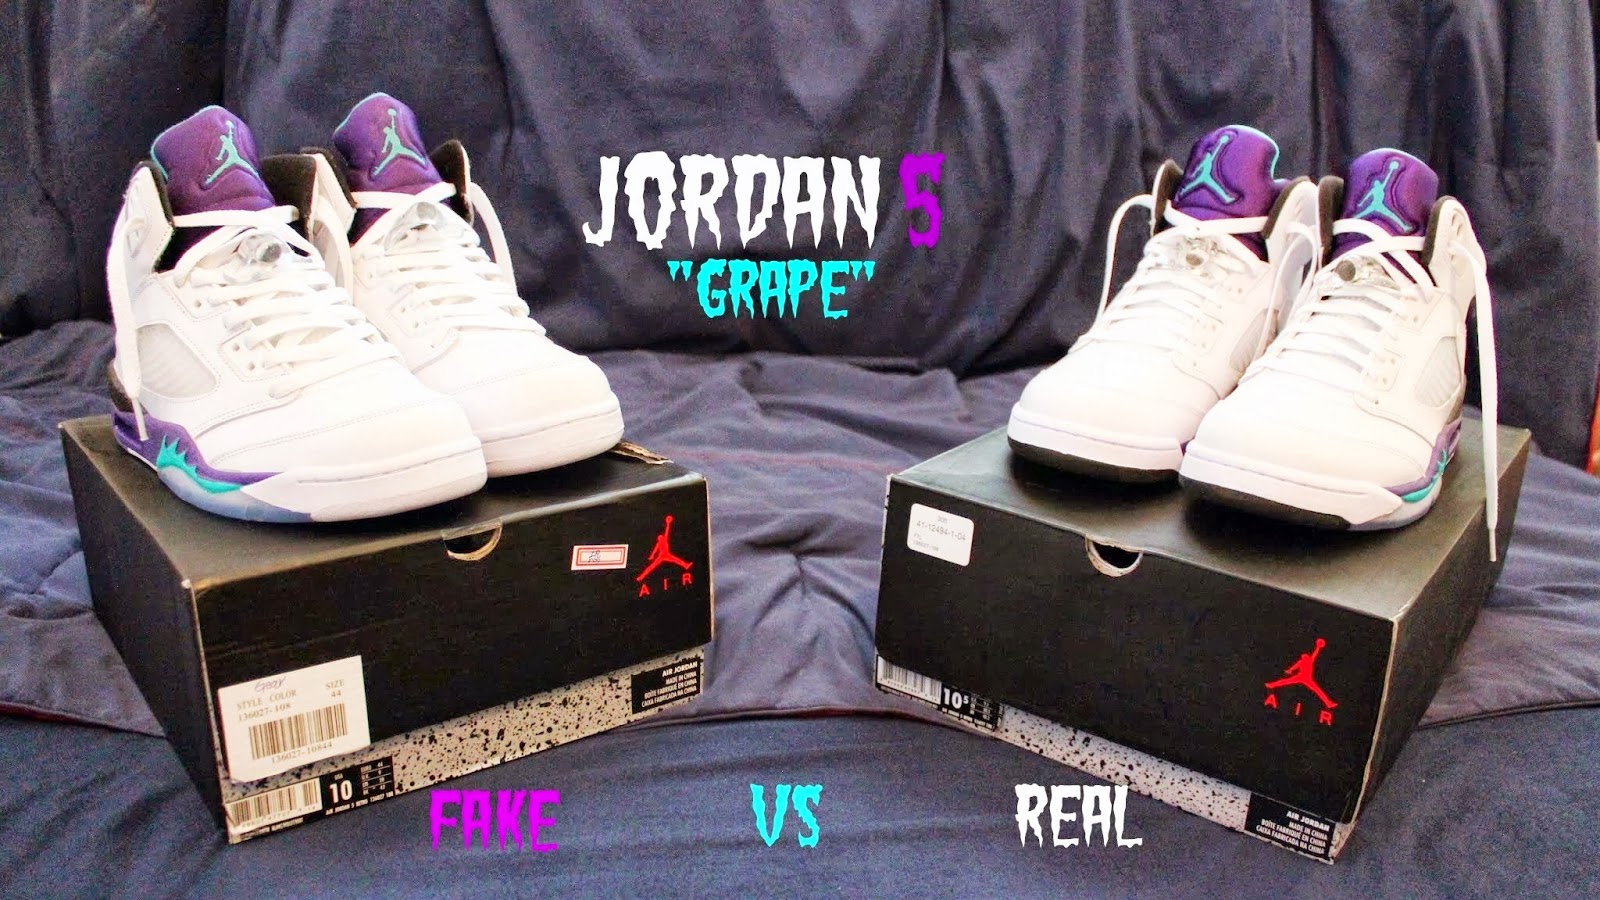 &quot;No Title&quot;: To replica or not to replica: that is the real Jordan